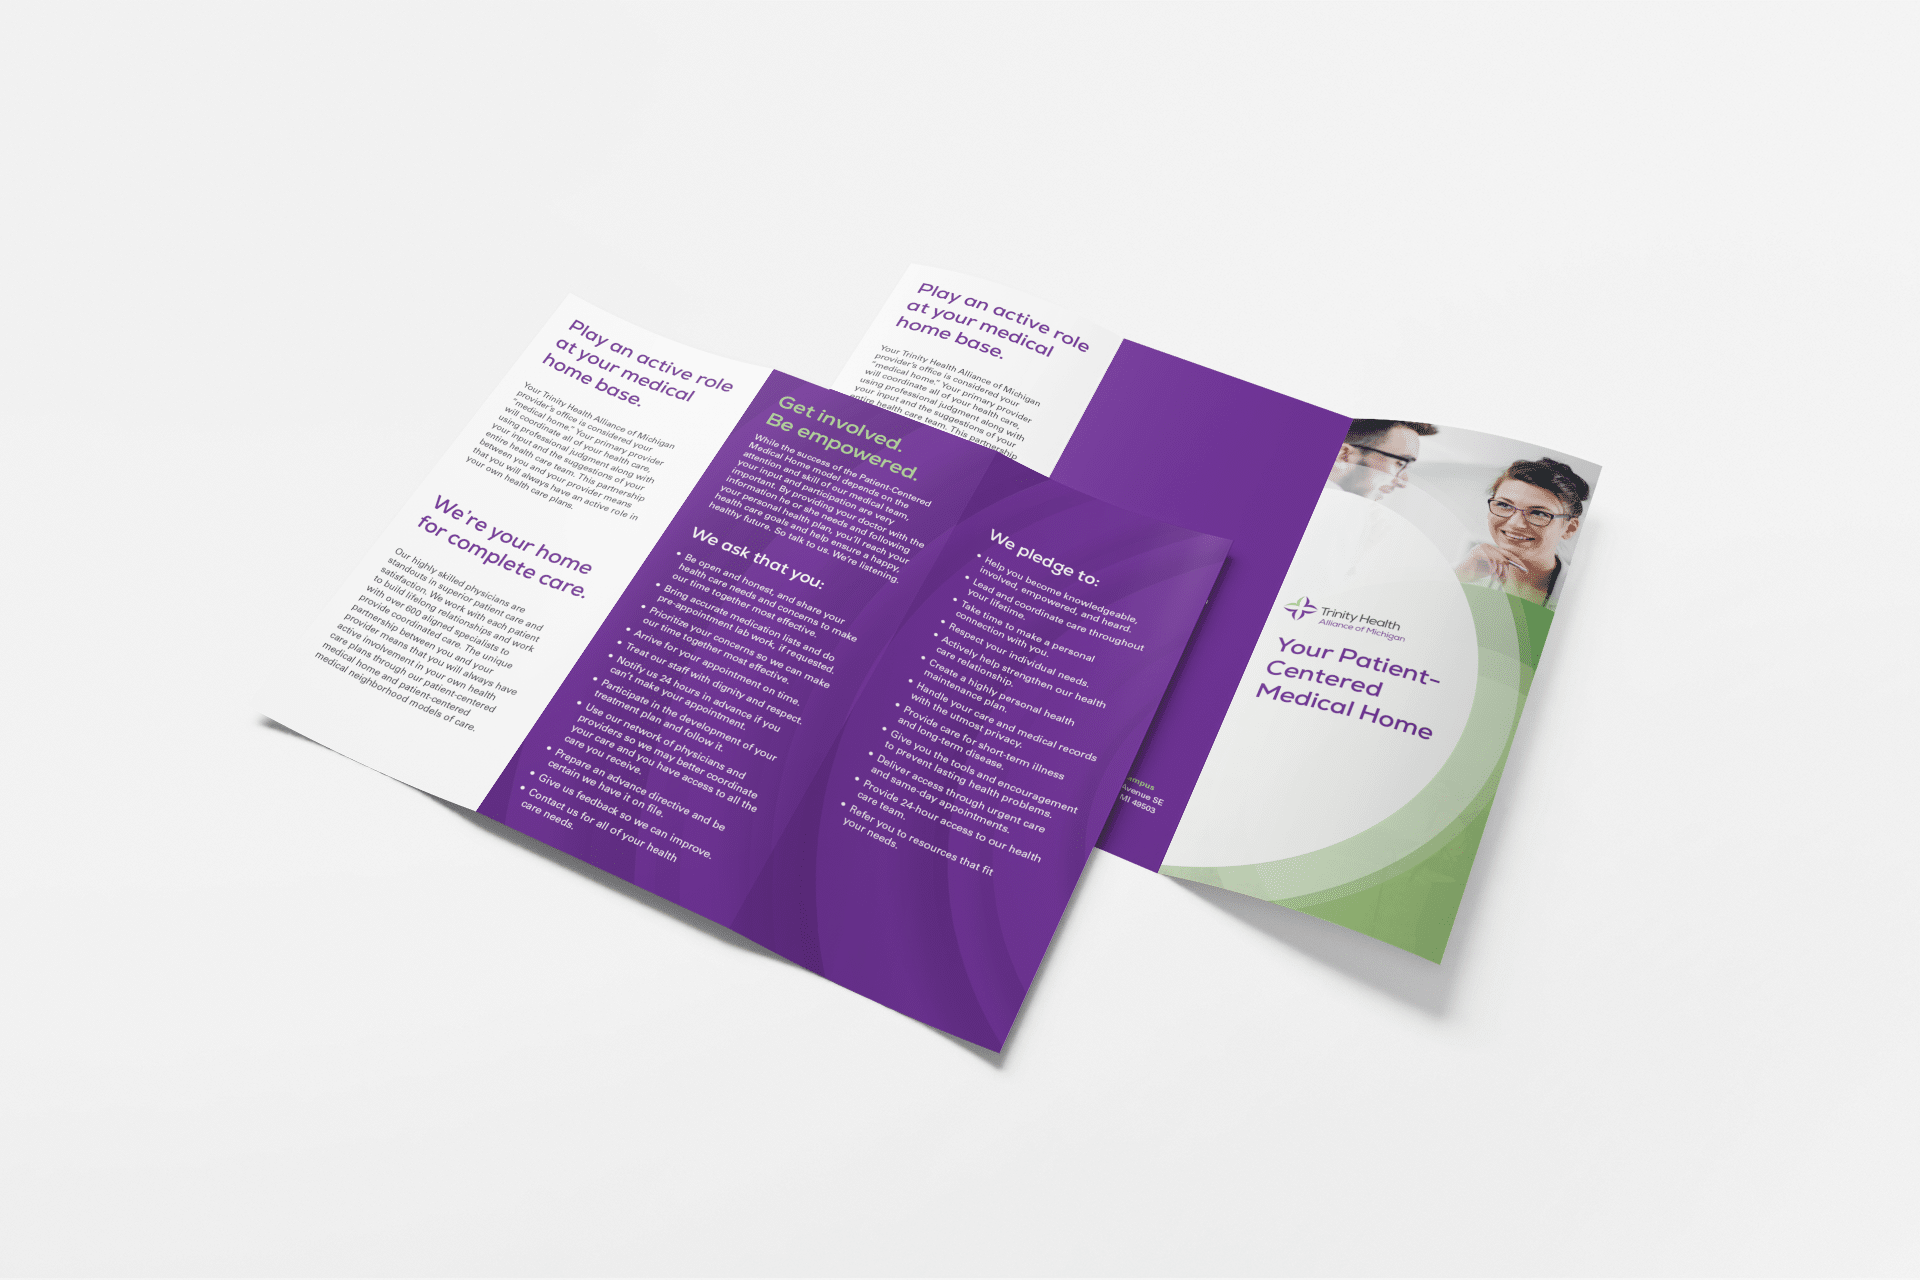 Trinity Health Alliance of Michigan: Brochure Mockup-Patient-Centered Medical Home